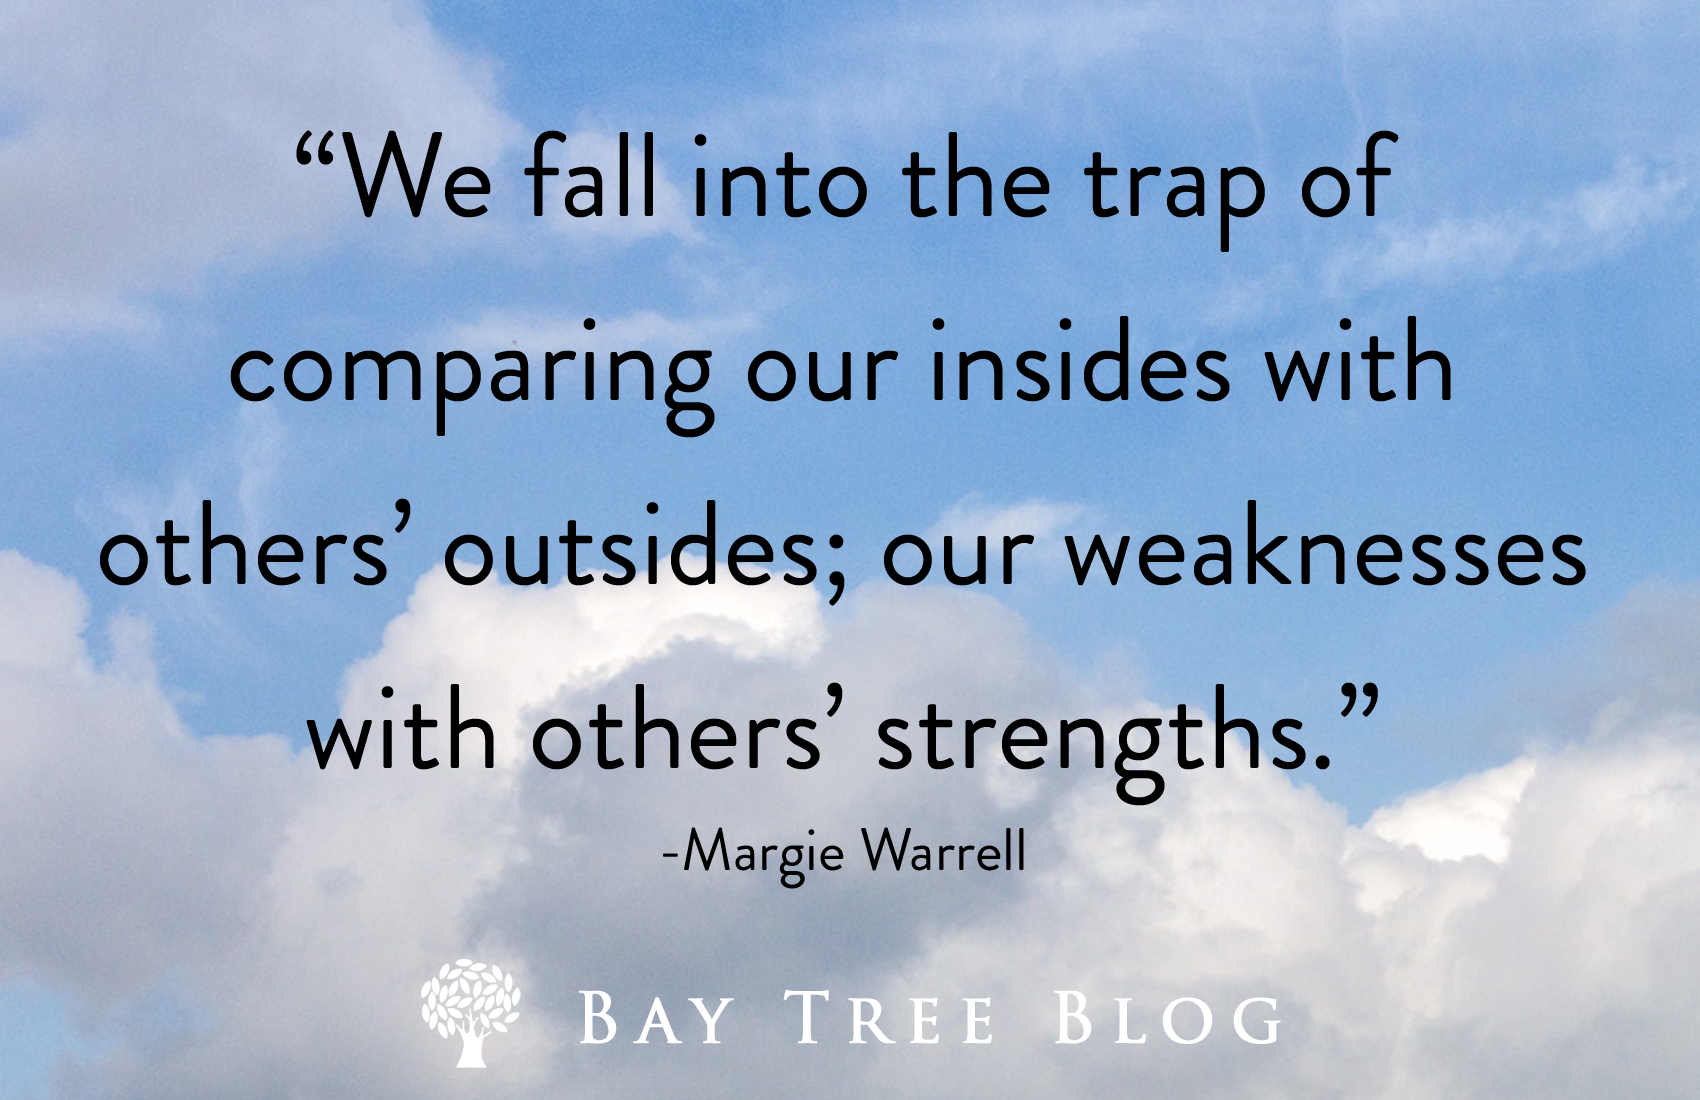 We fall into the trap of comparing our insides with others’ outsides; our weaknesses with others’ strengths. -Margie Warrell BayTreeBlog.com